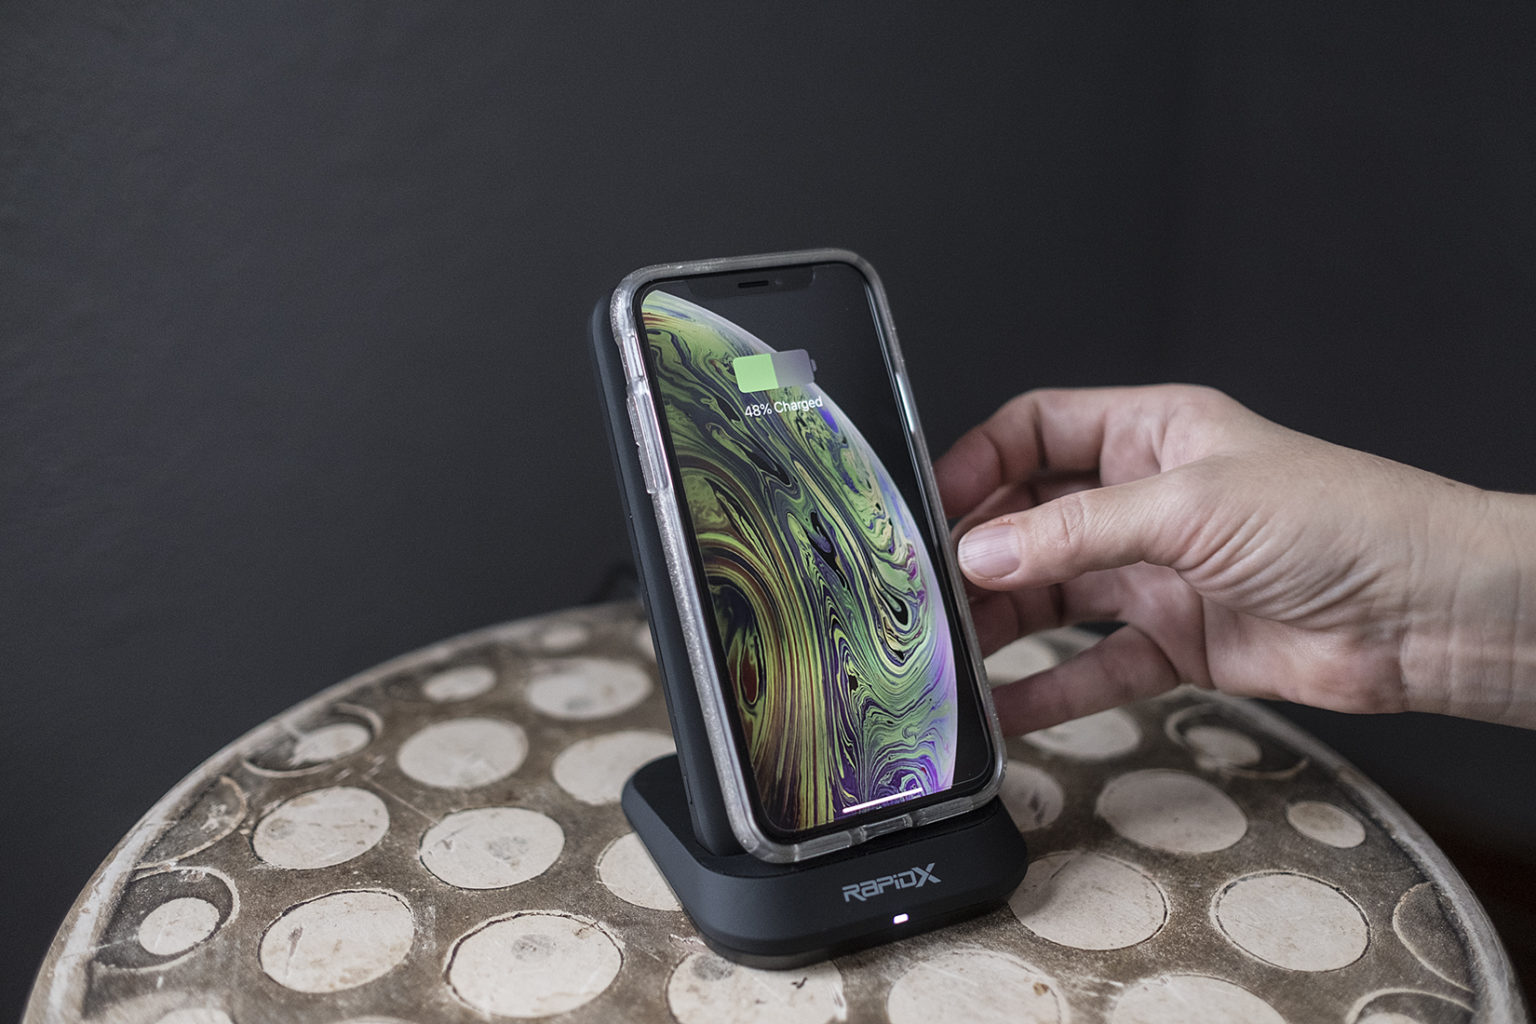 Review of RapidX MyPort wireless charger